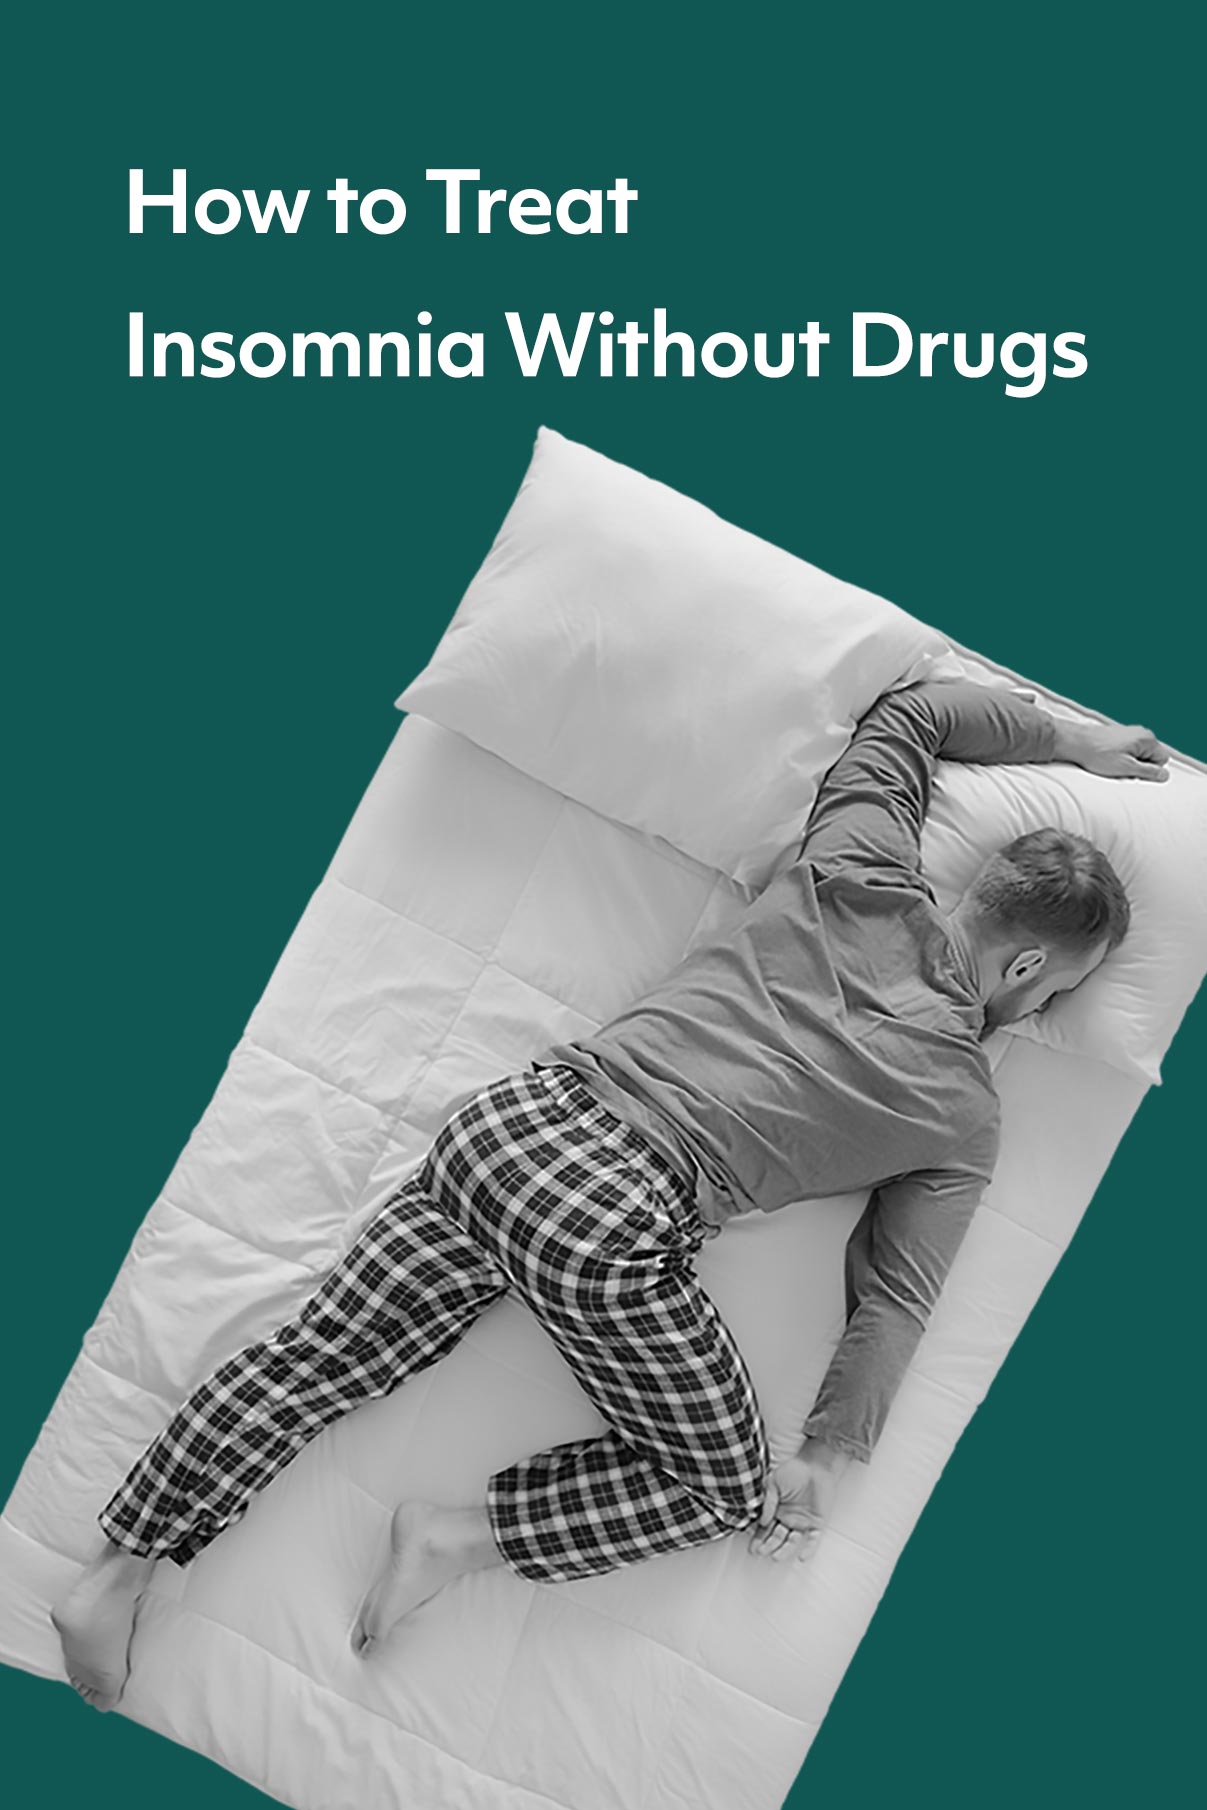 Treating insomnia without drugs